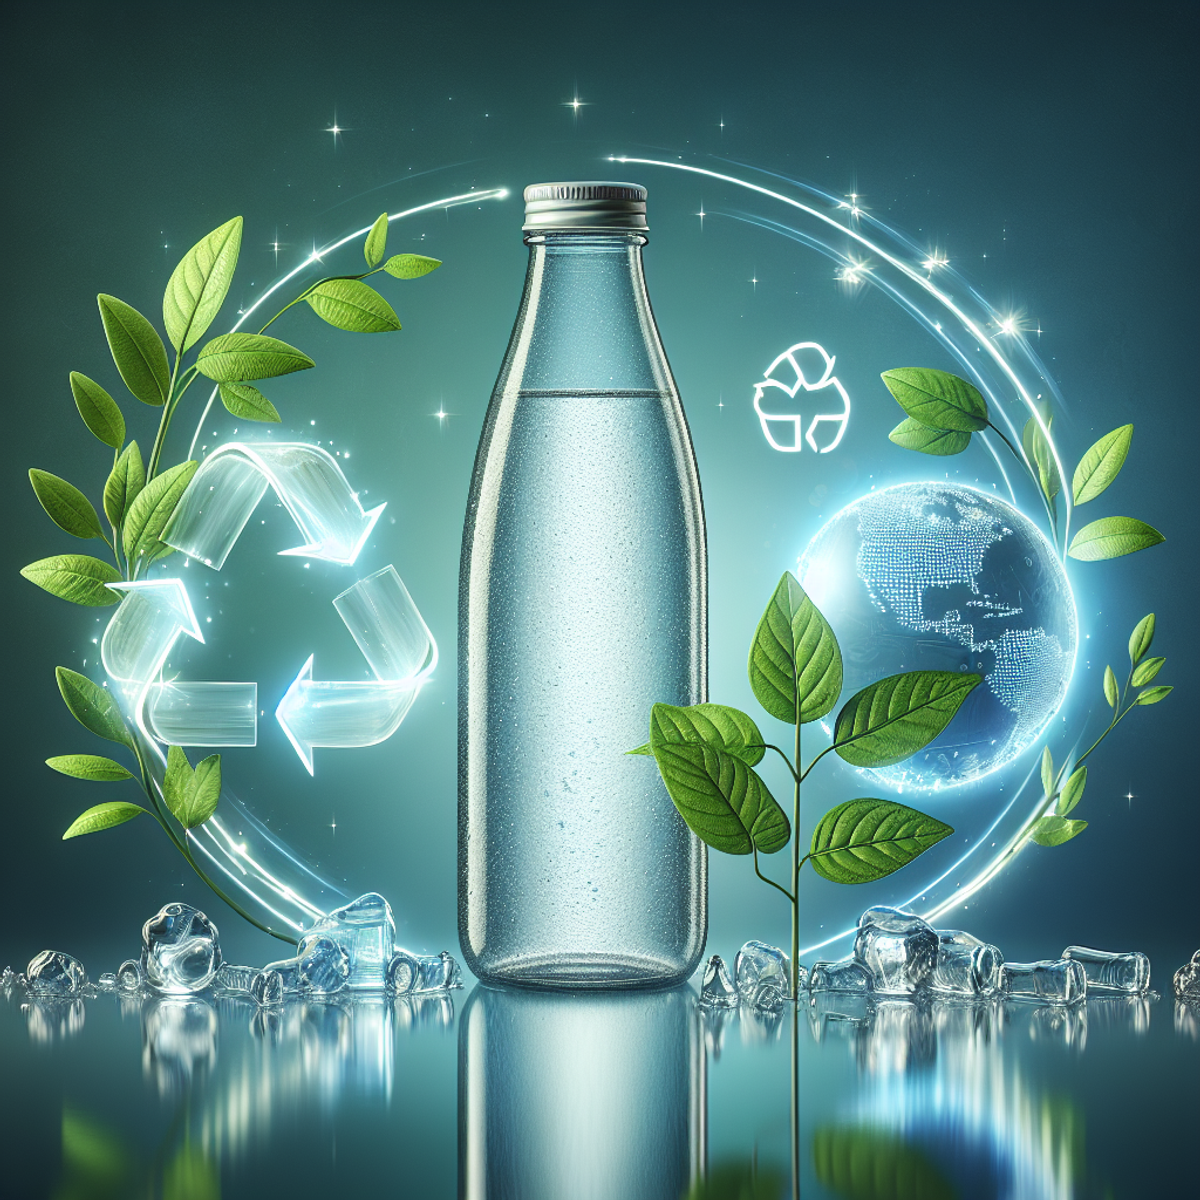 A clear, gleaming glass water bottle filled with fresh water, surrounded by a flourishing plant and a recycling symbol formed by arrows encircling the